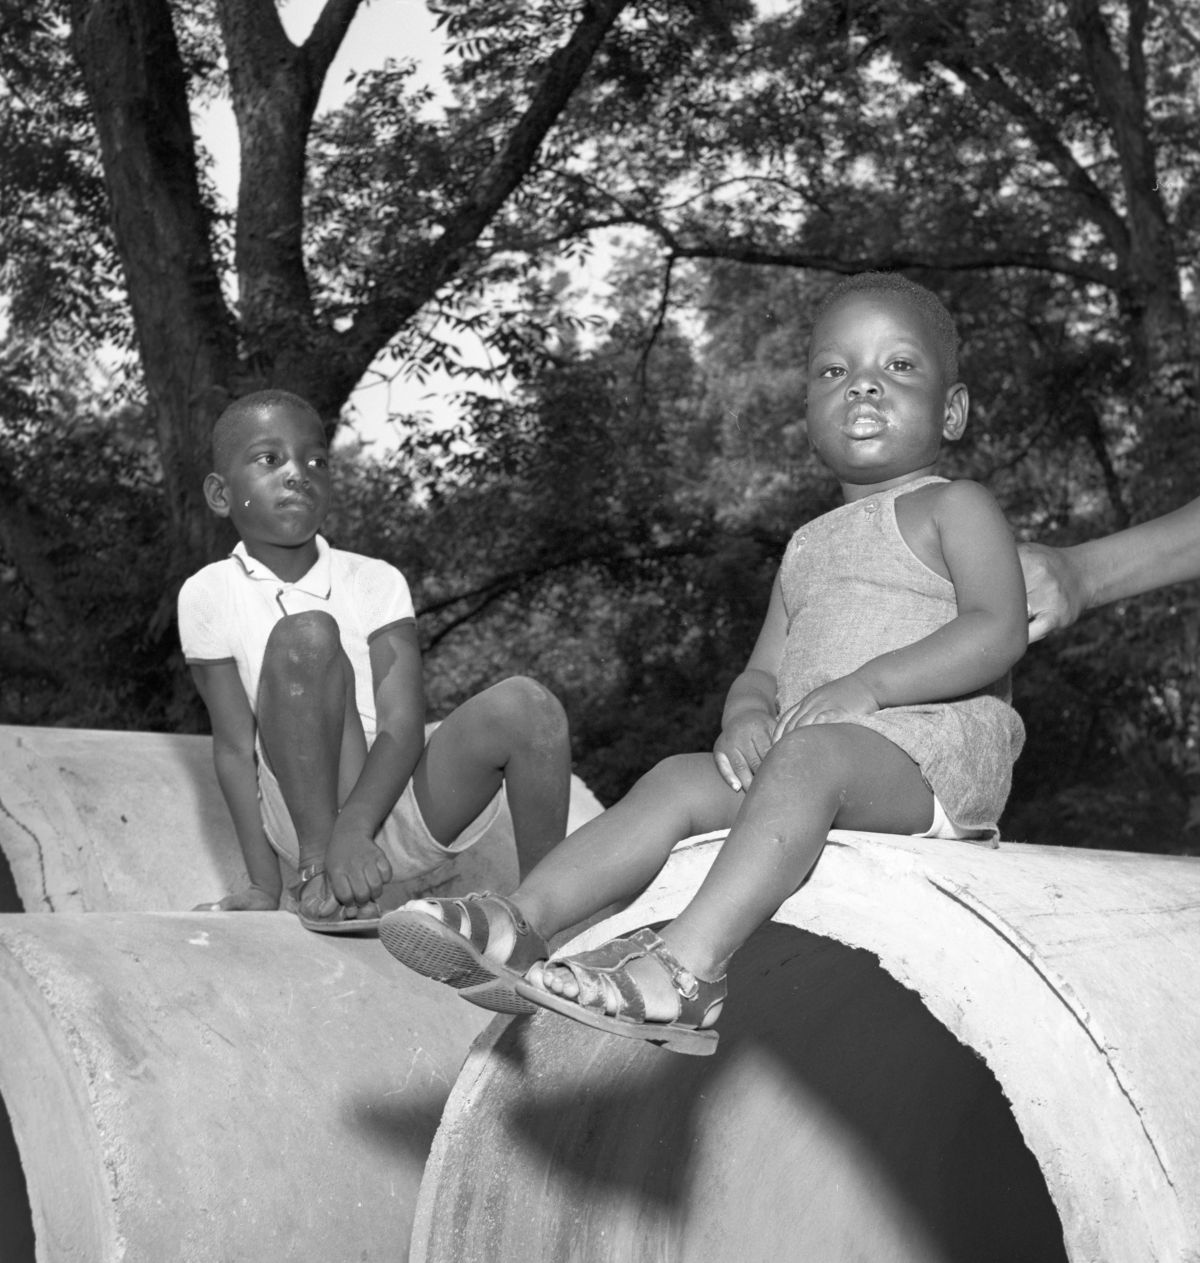  African American boys at a playground on Brevard St. in Tallahassee.